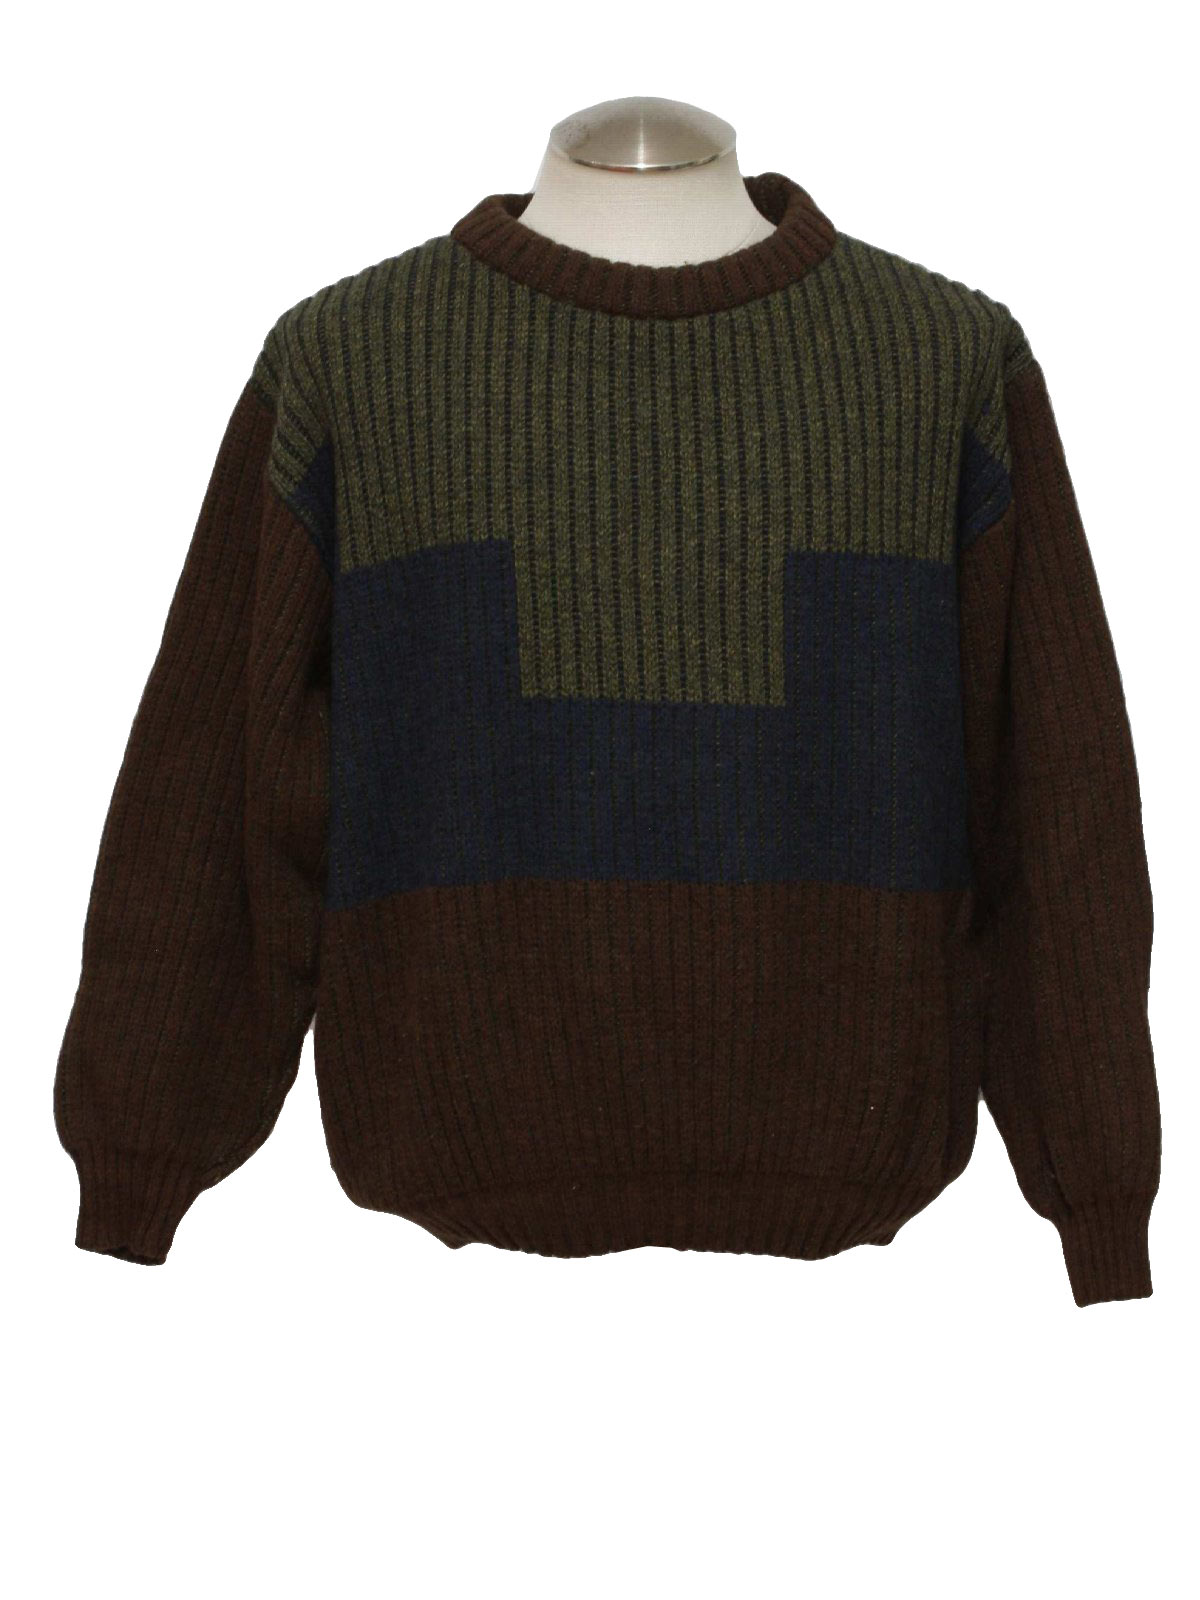 Retro 80's Sweater: 80s -Pierre Cardin- Mens olive green, brown, blue ...